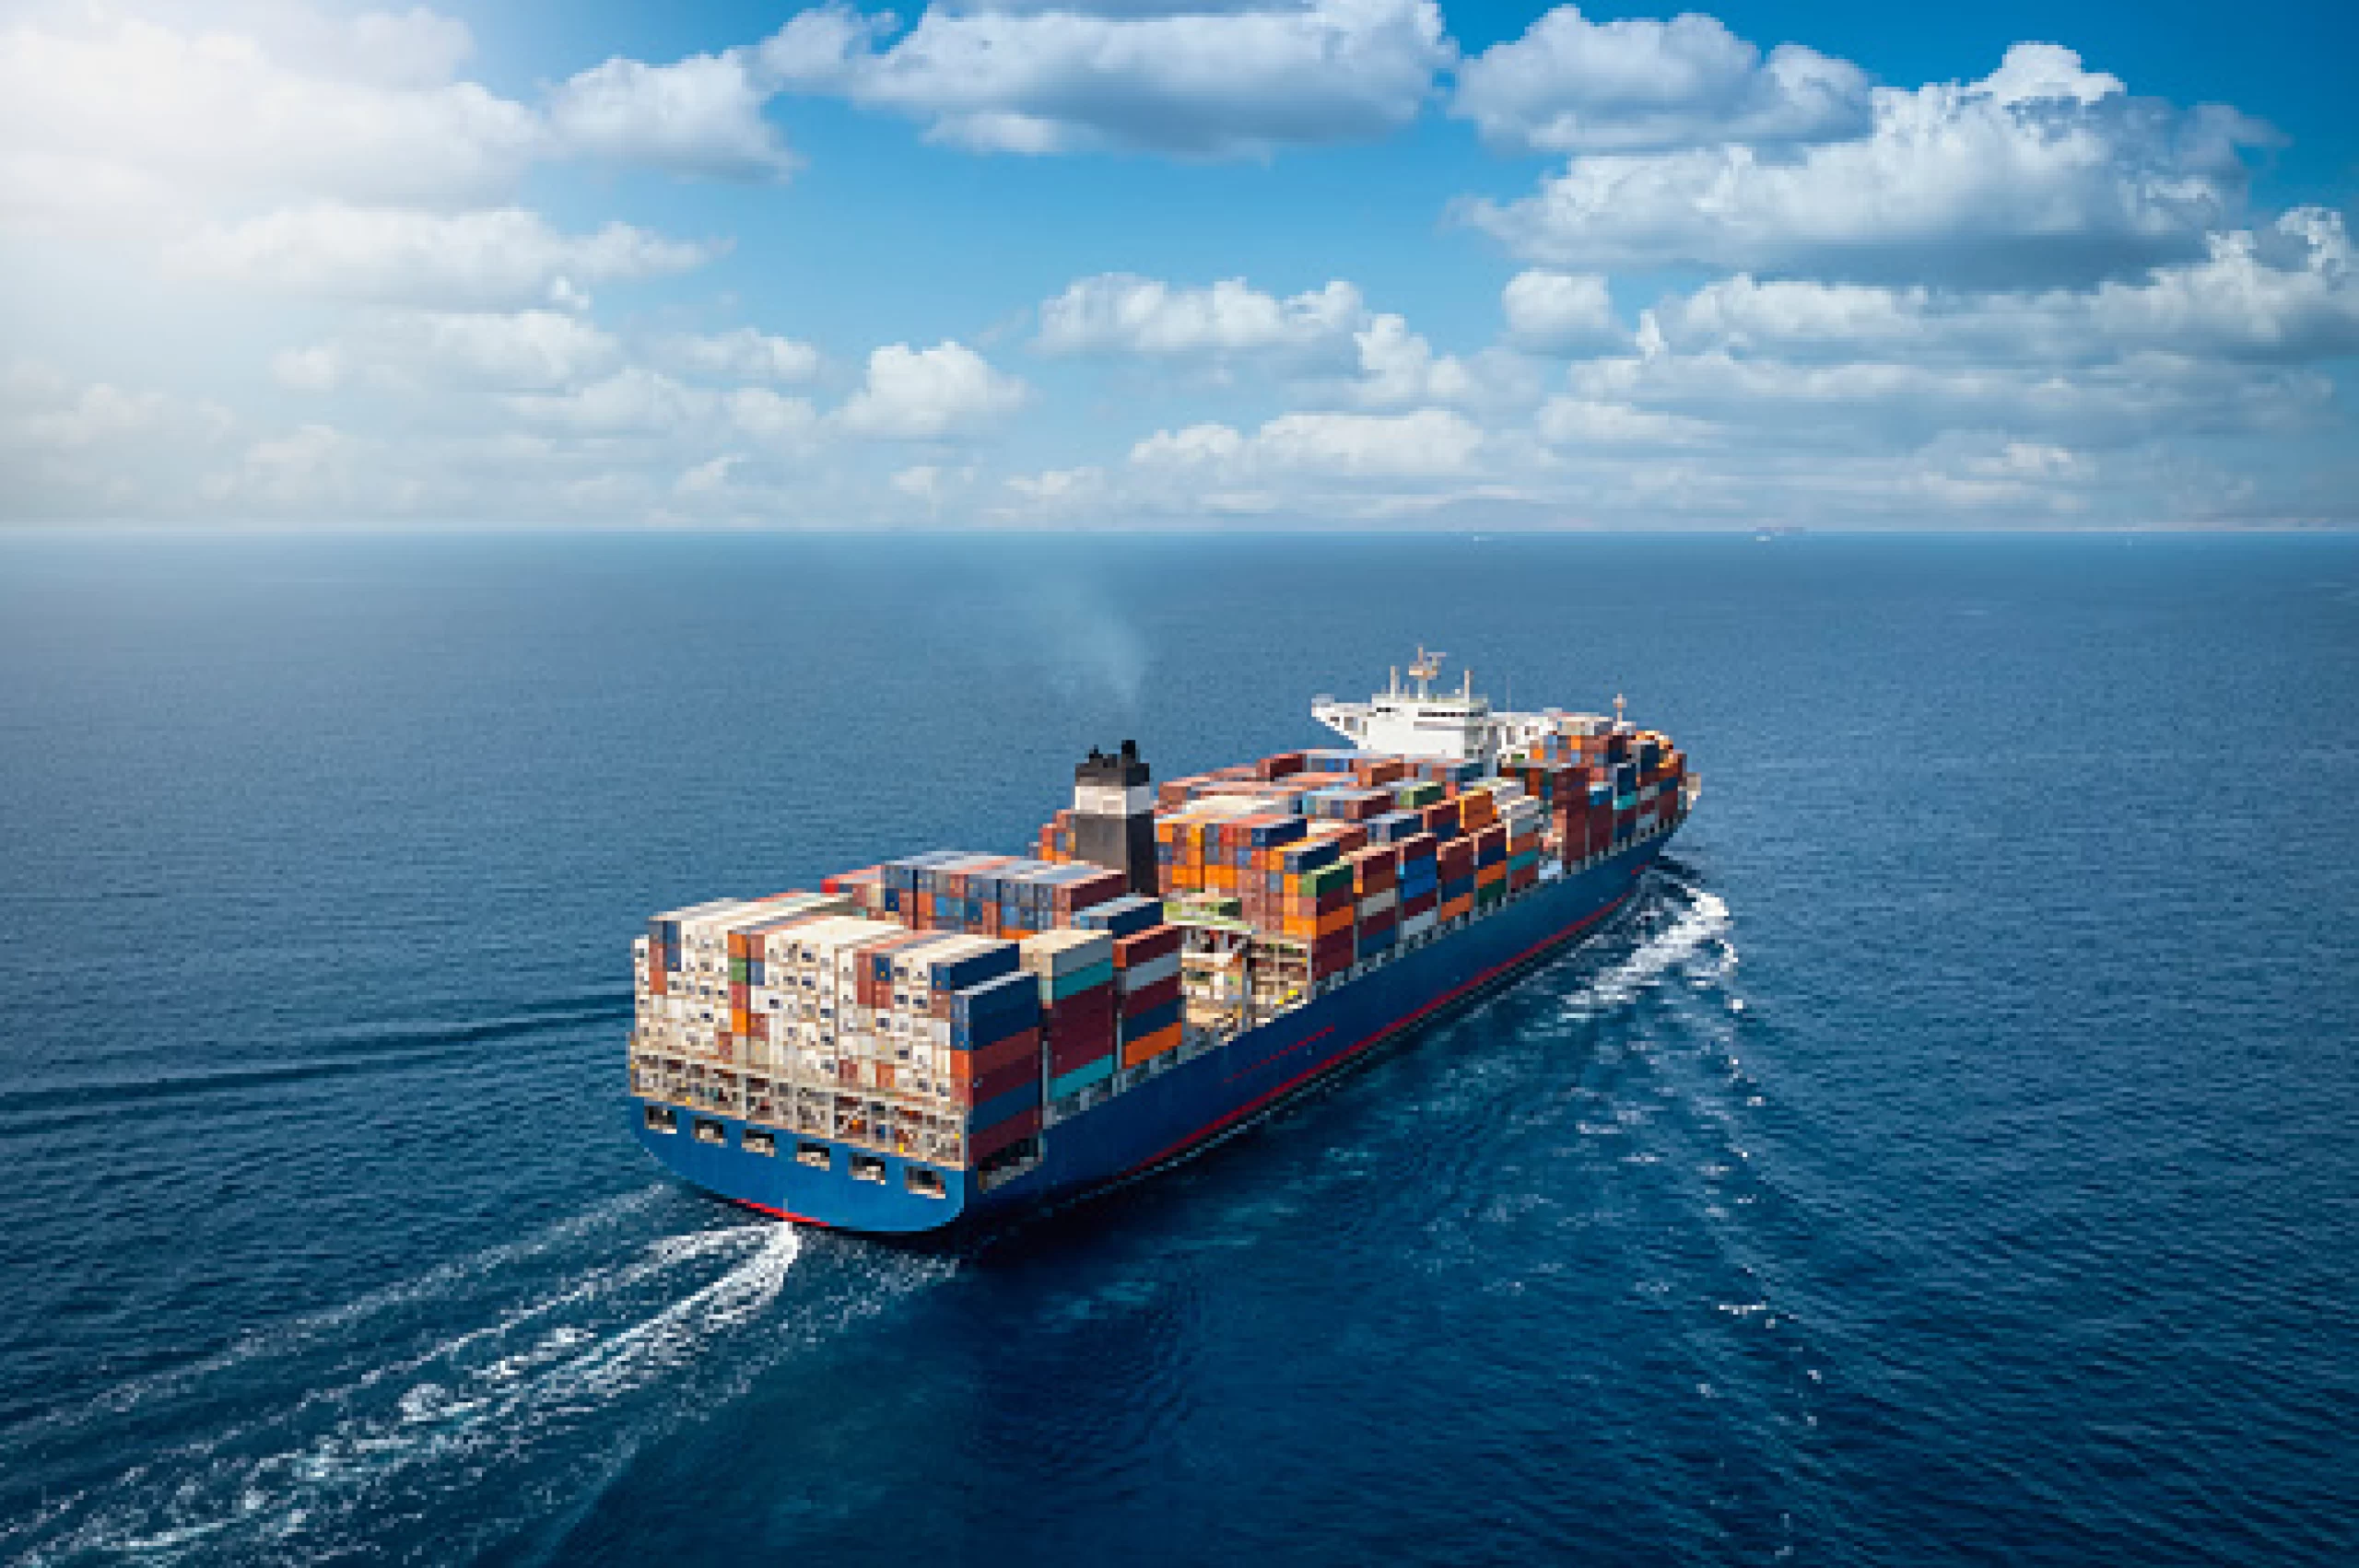 An aerial view of a top freight forwarder's large container ship in the ocean.